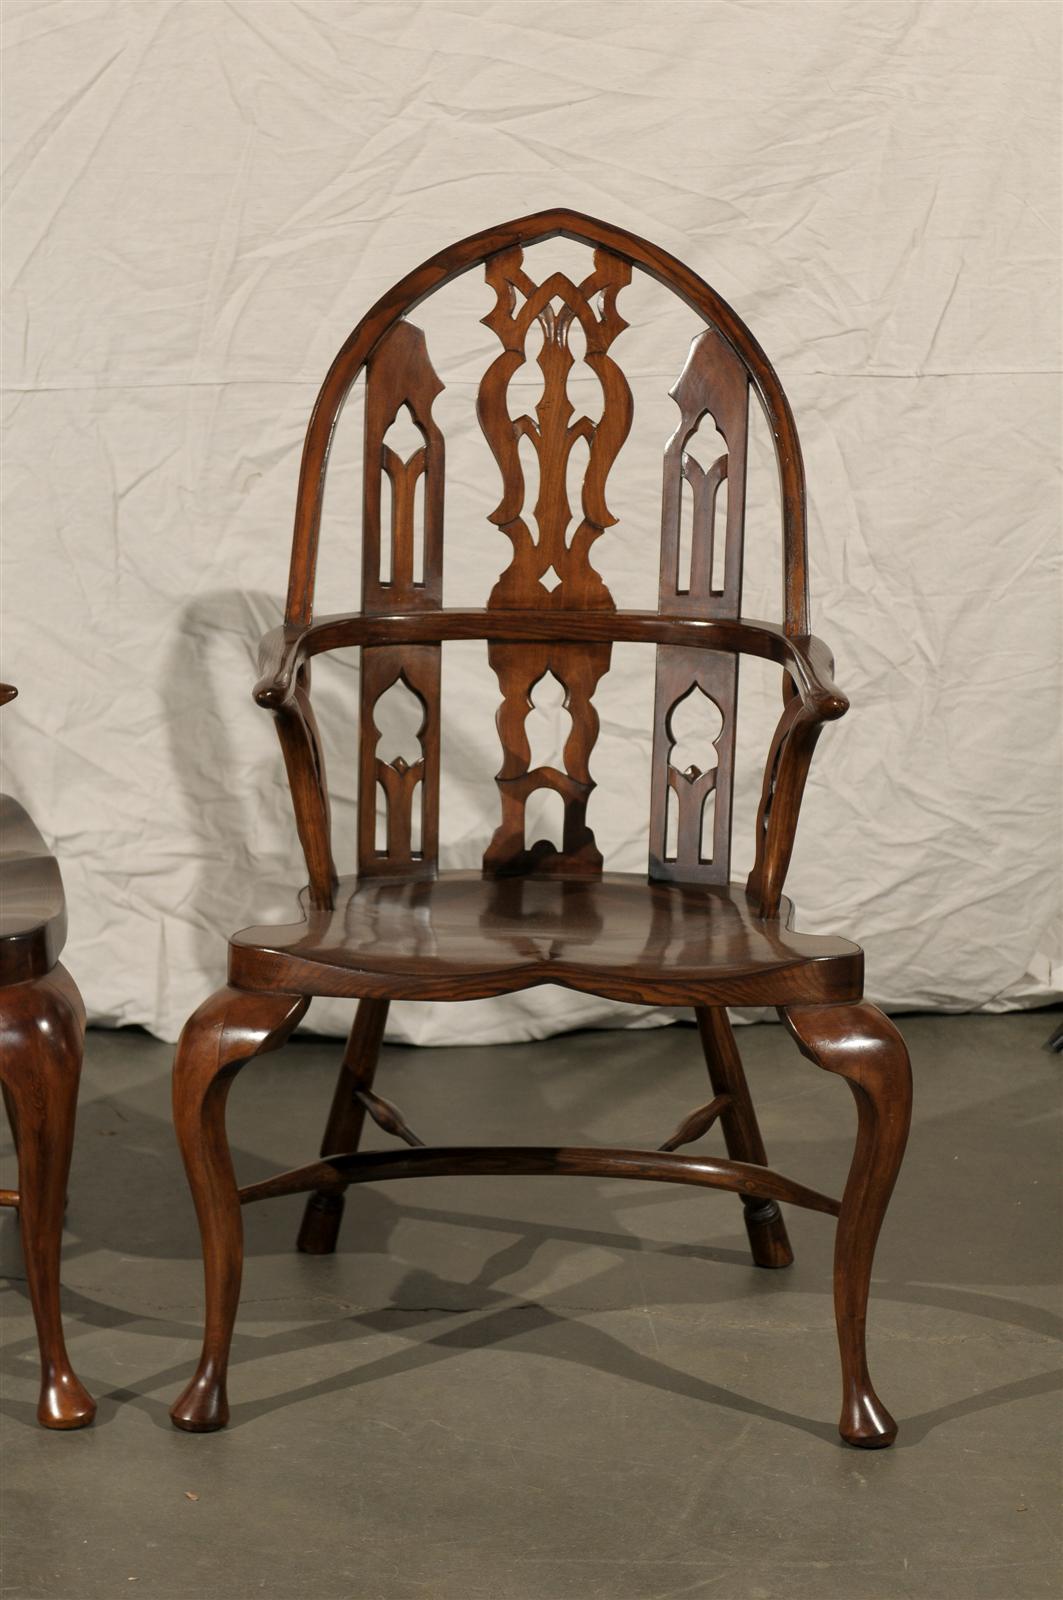 Pair of 20th century Gothic style Windsor armchairs
Measures: 27.5